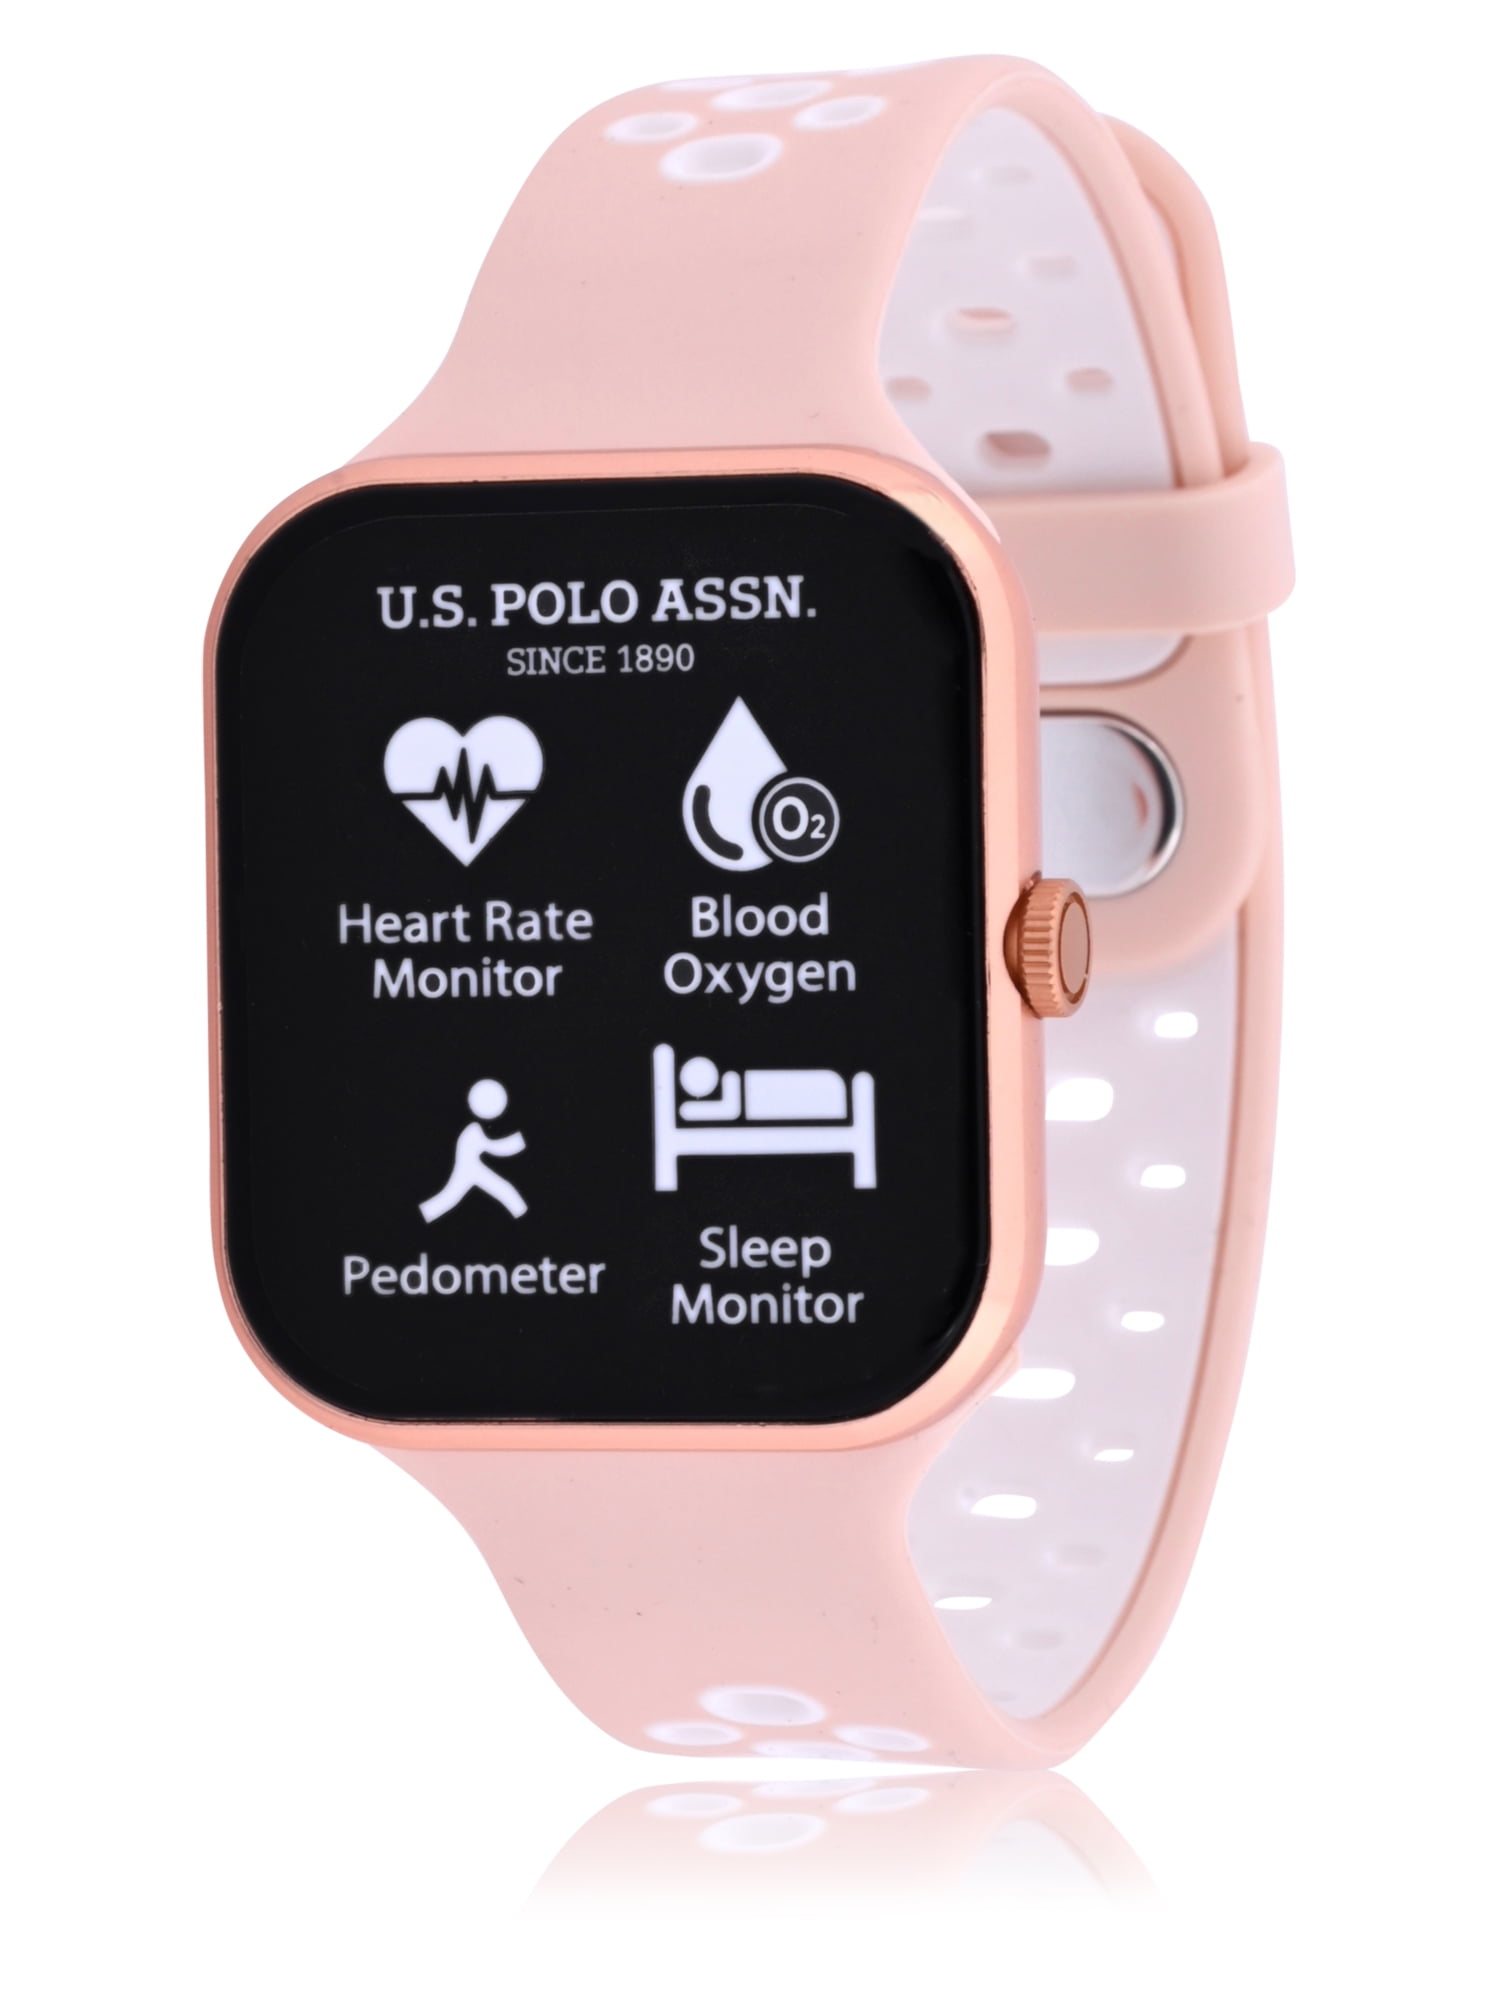 U.S. Polo Assn. Adult Unisex Smart Watch with Silicone Strap in Gold and  White (US6140BU) 